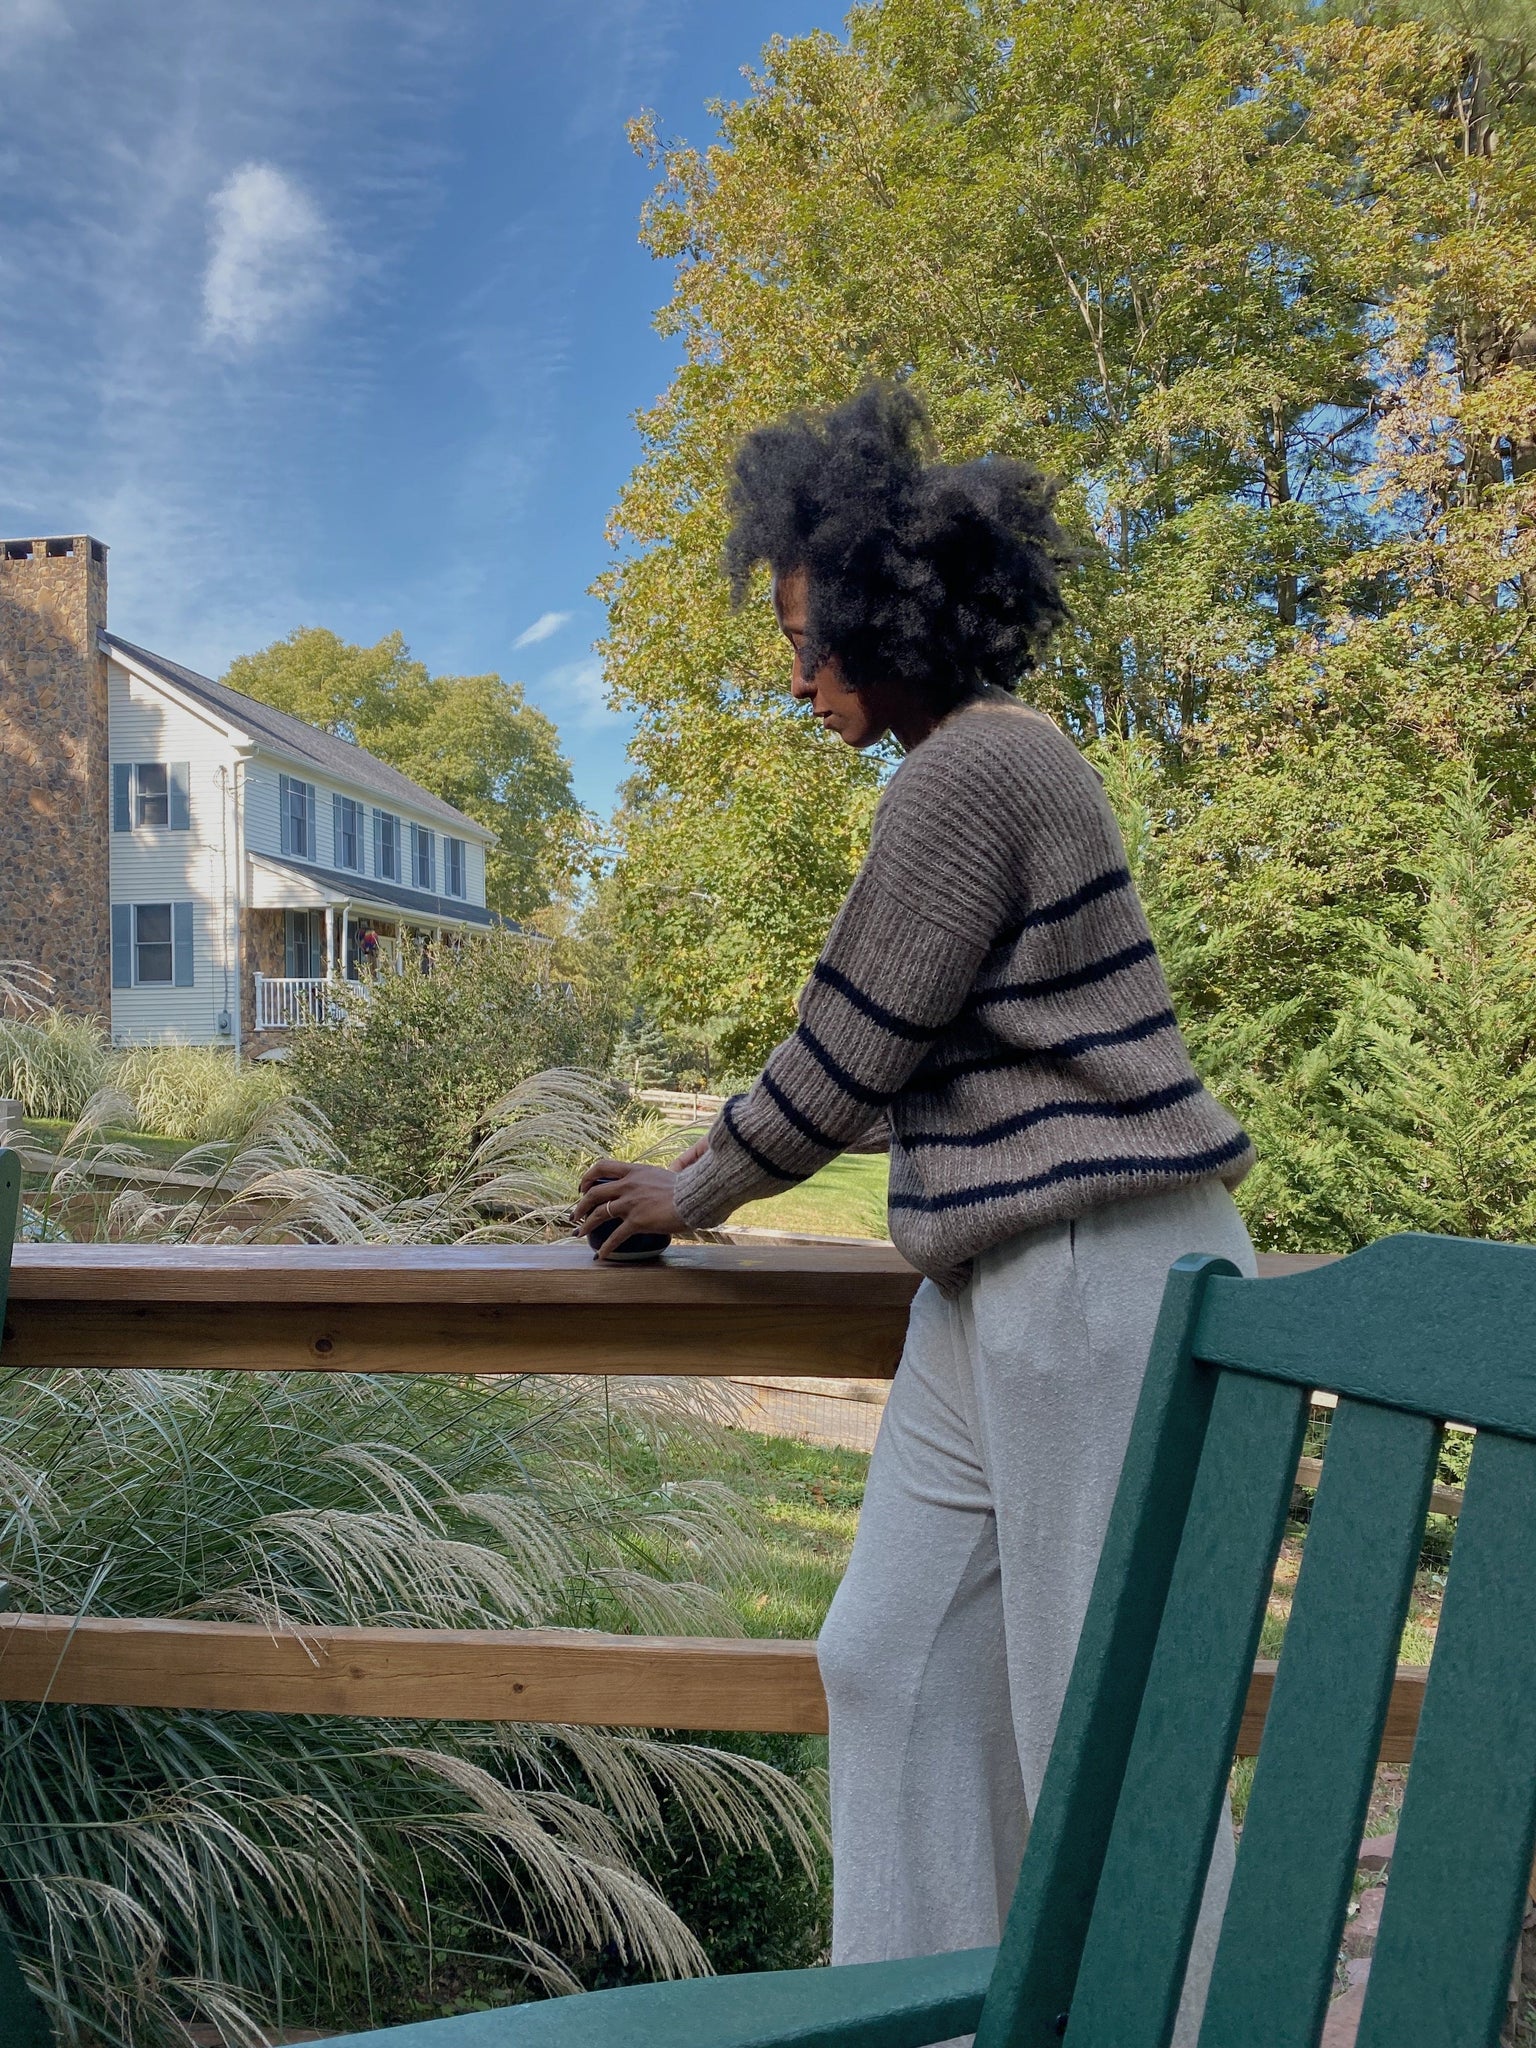 A woman sitting on a cozy green chair on a deck overlooking a house, dressed in a warm Field Sweater - Brown Stripe made of alpaca fiber.